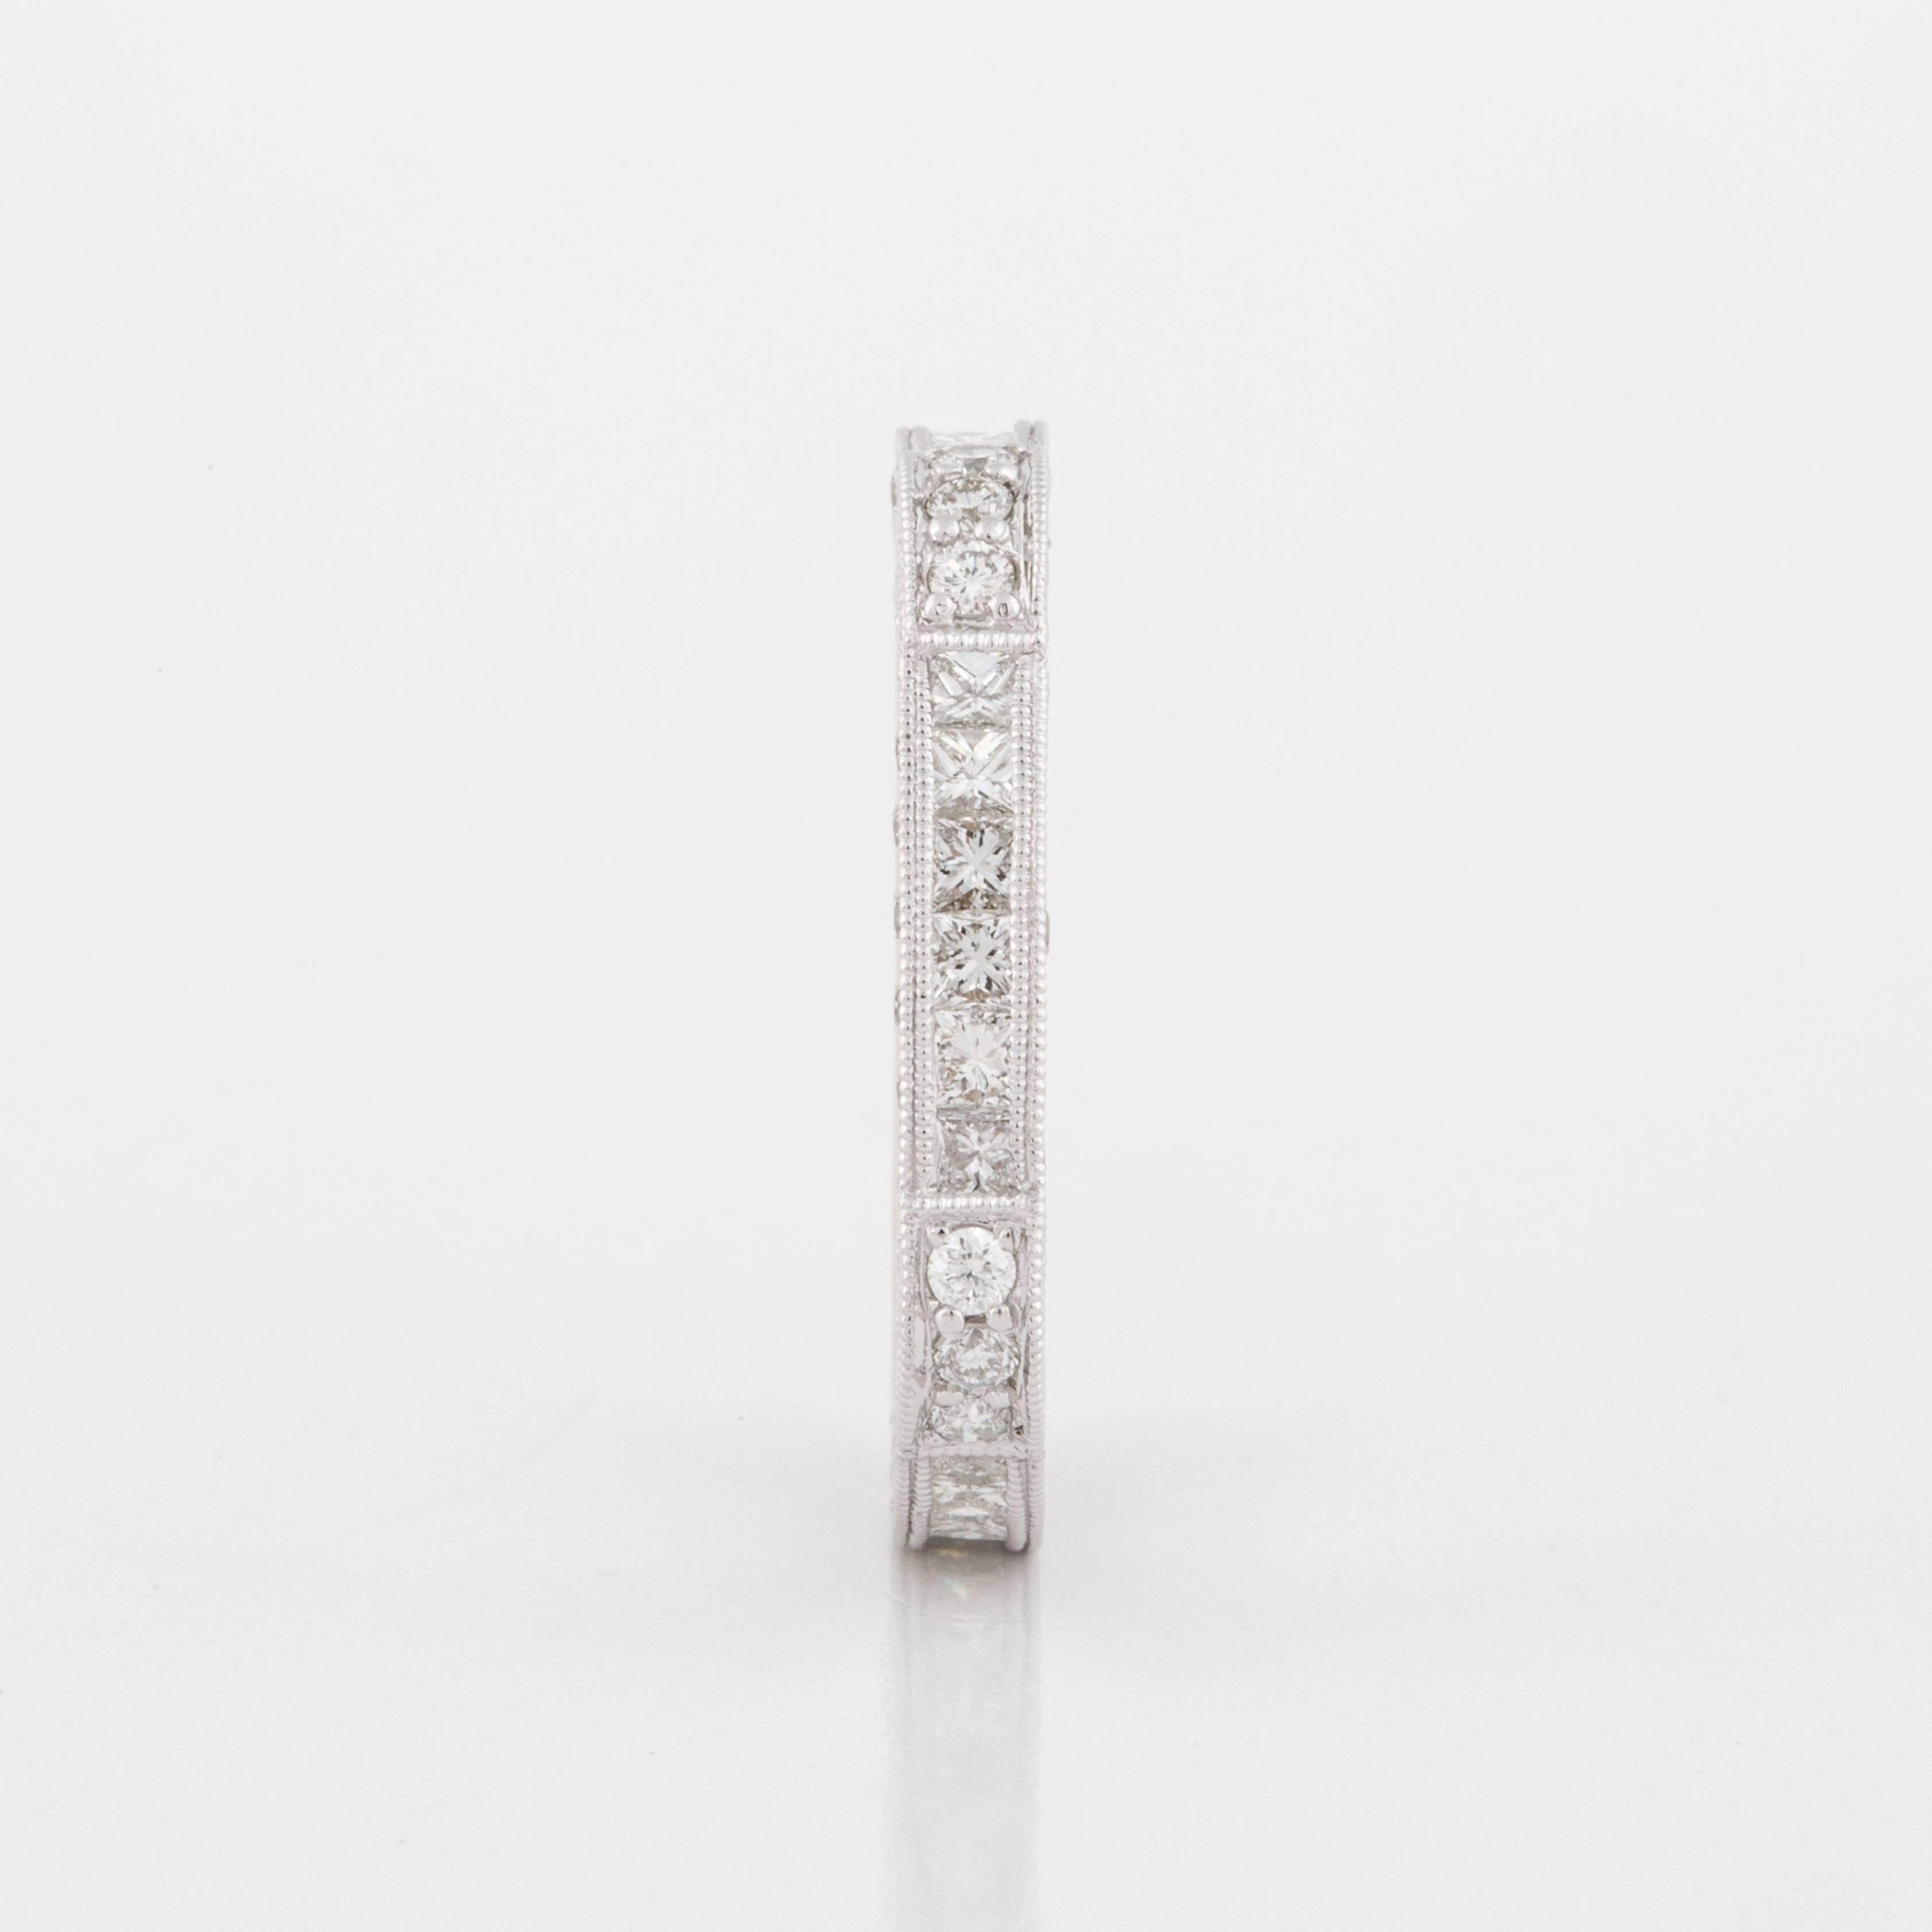 Eternity band composed of 18K white gold with 18 princess-cut diamonds and 42 round brilliant-cut diamonds; G-H color and VS1-2 clarity, with a total carat weight of 2.60.  The band features millegrain work as well as a more squared shape.  It is